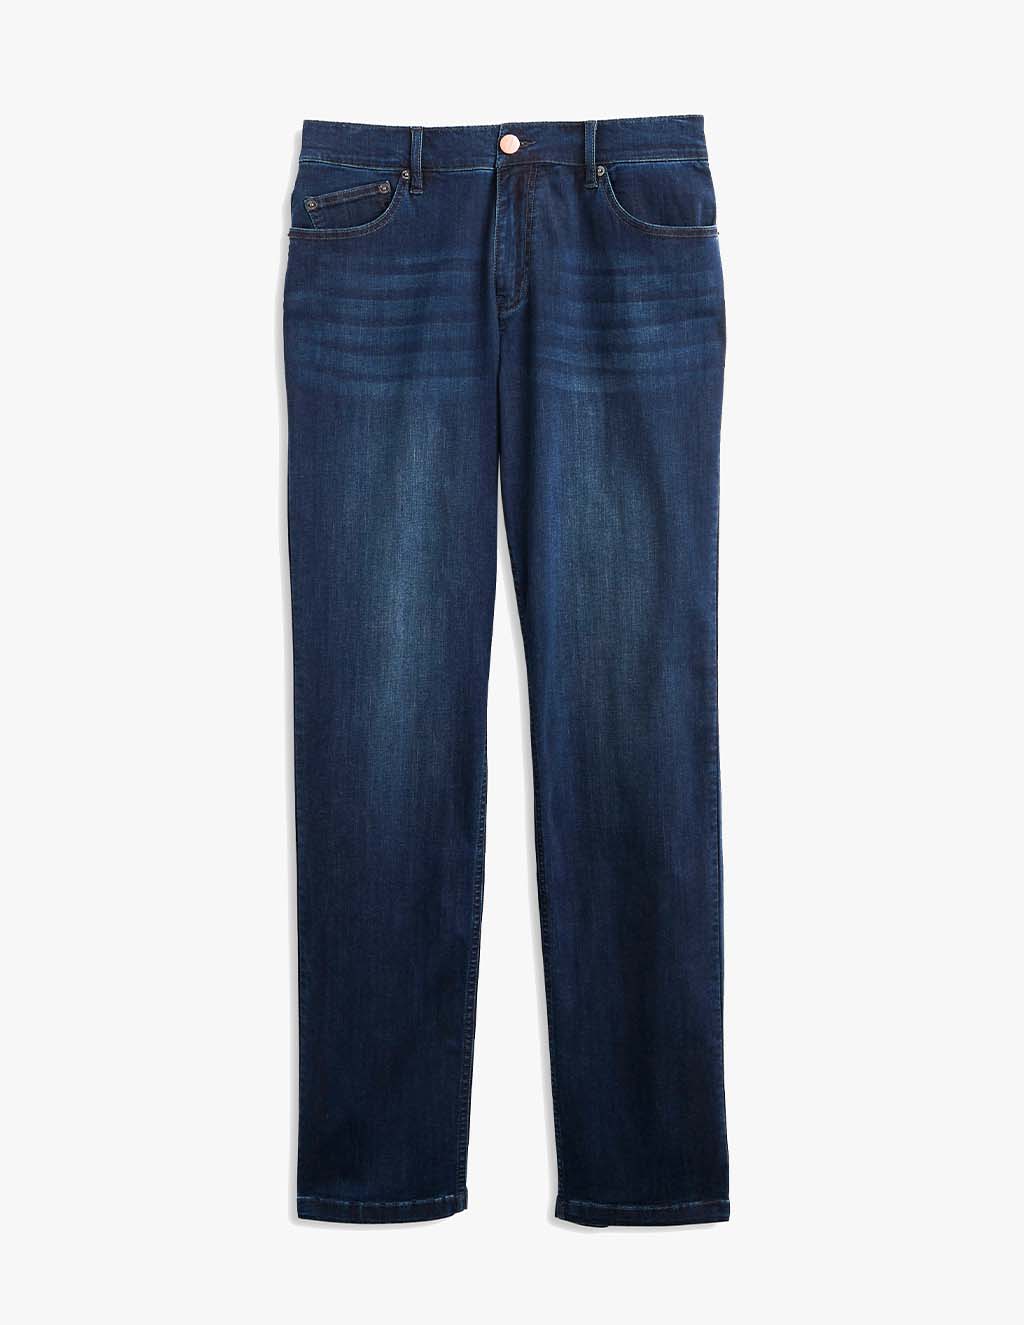 Men's Perfect Jeans (free shipping)